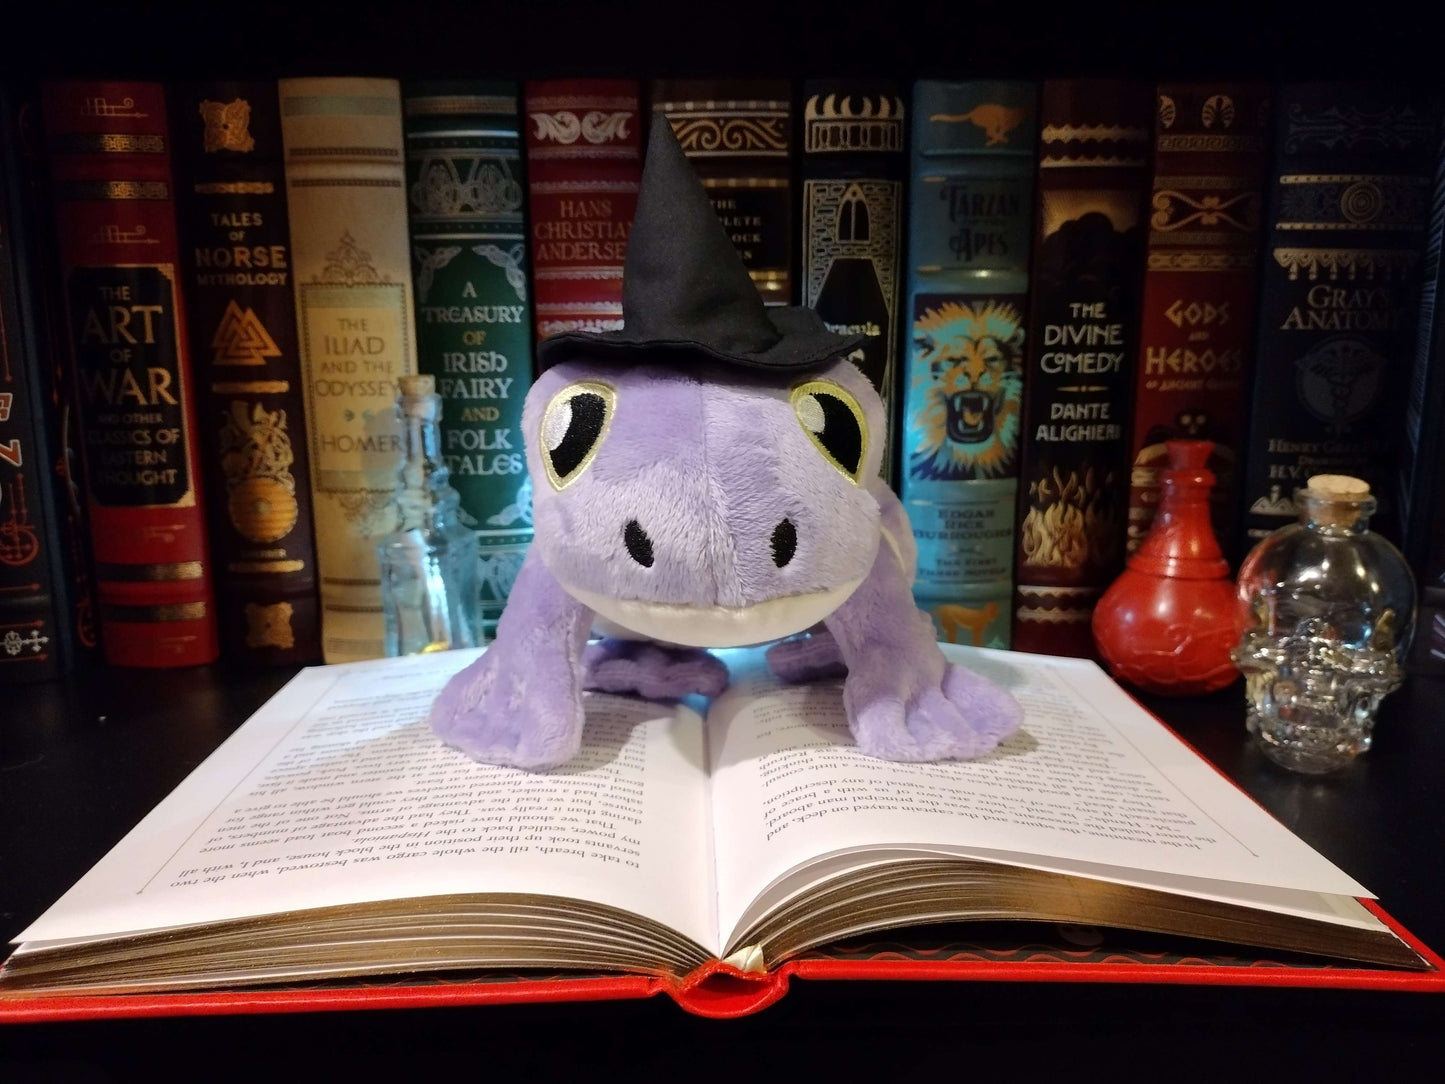 Magical frog plushies